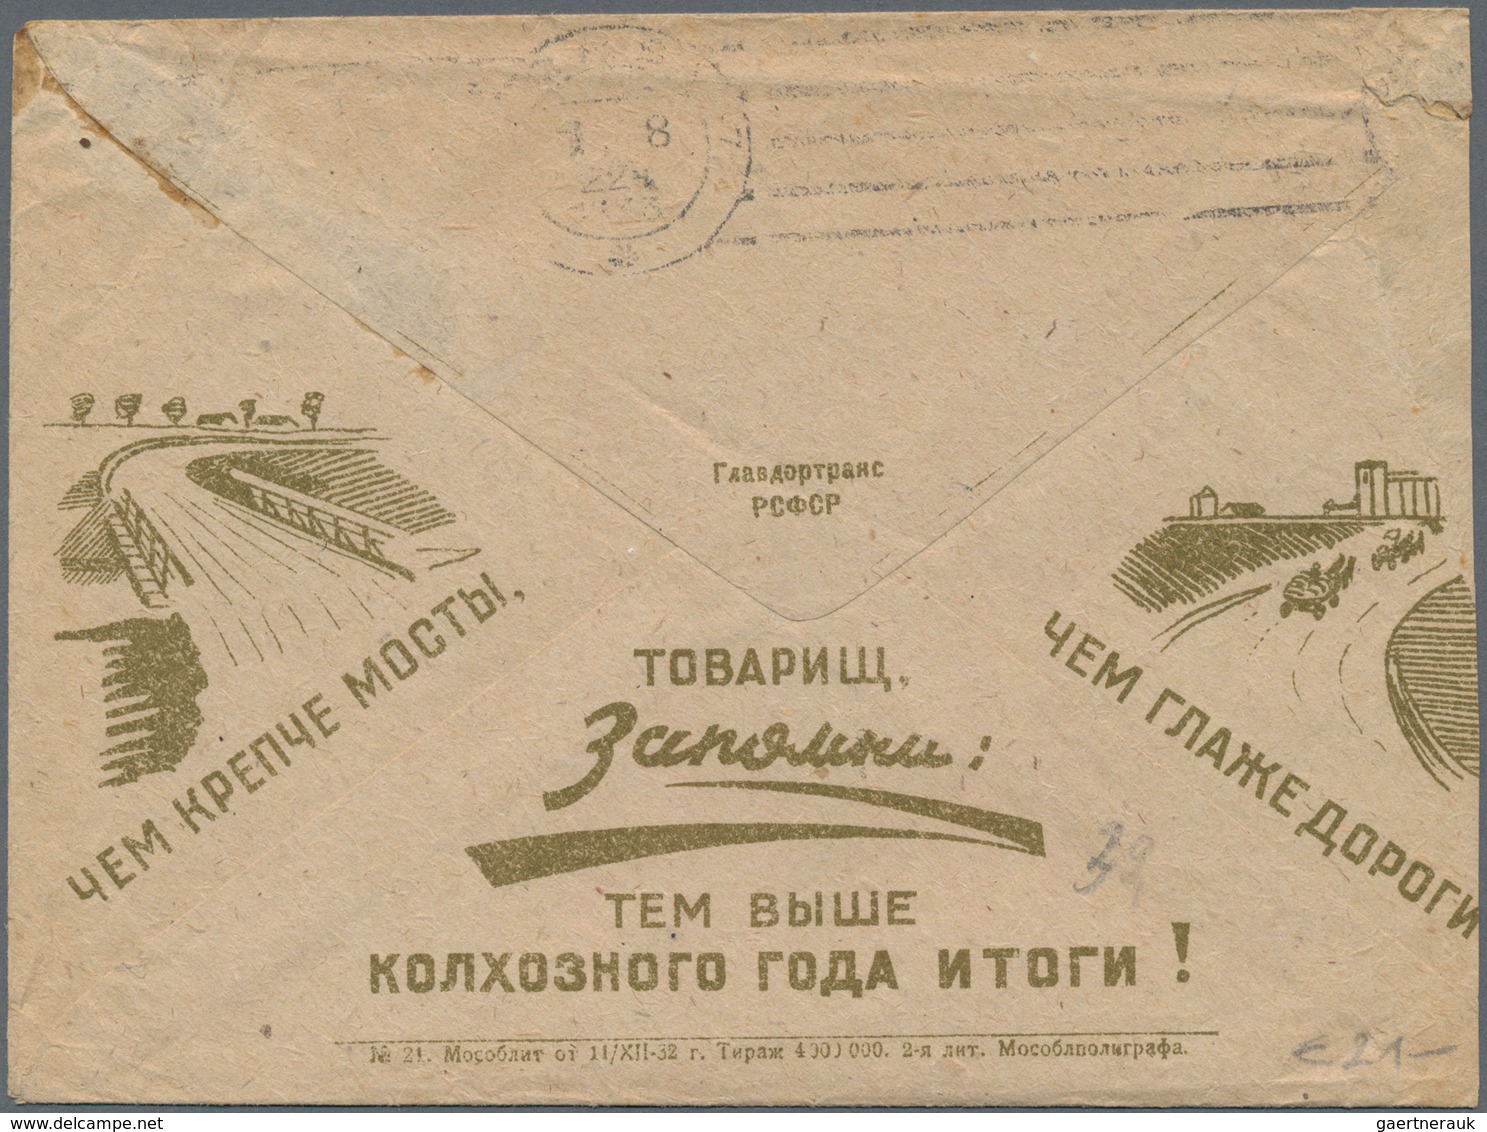 Sowjetunion - Ganzsachen: 1930/33 three unused and two used postal stationery envelopes with propaga